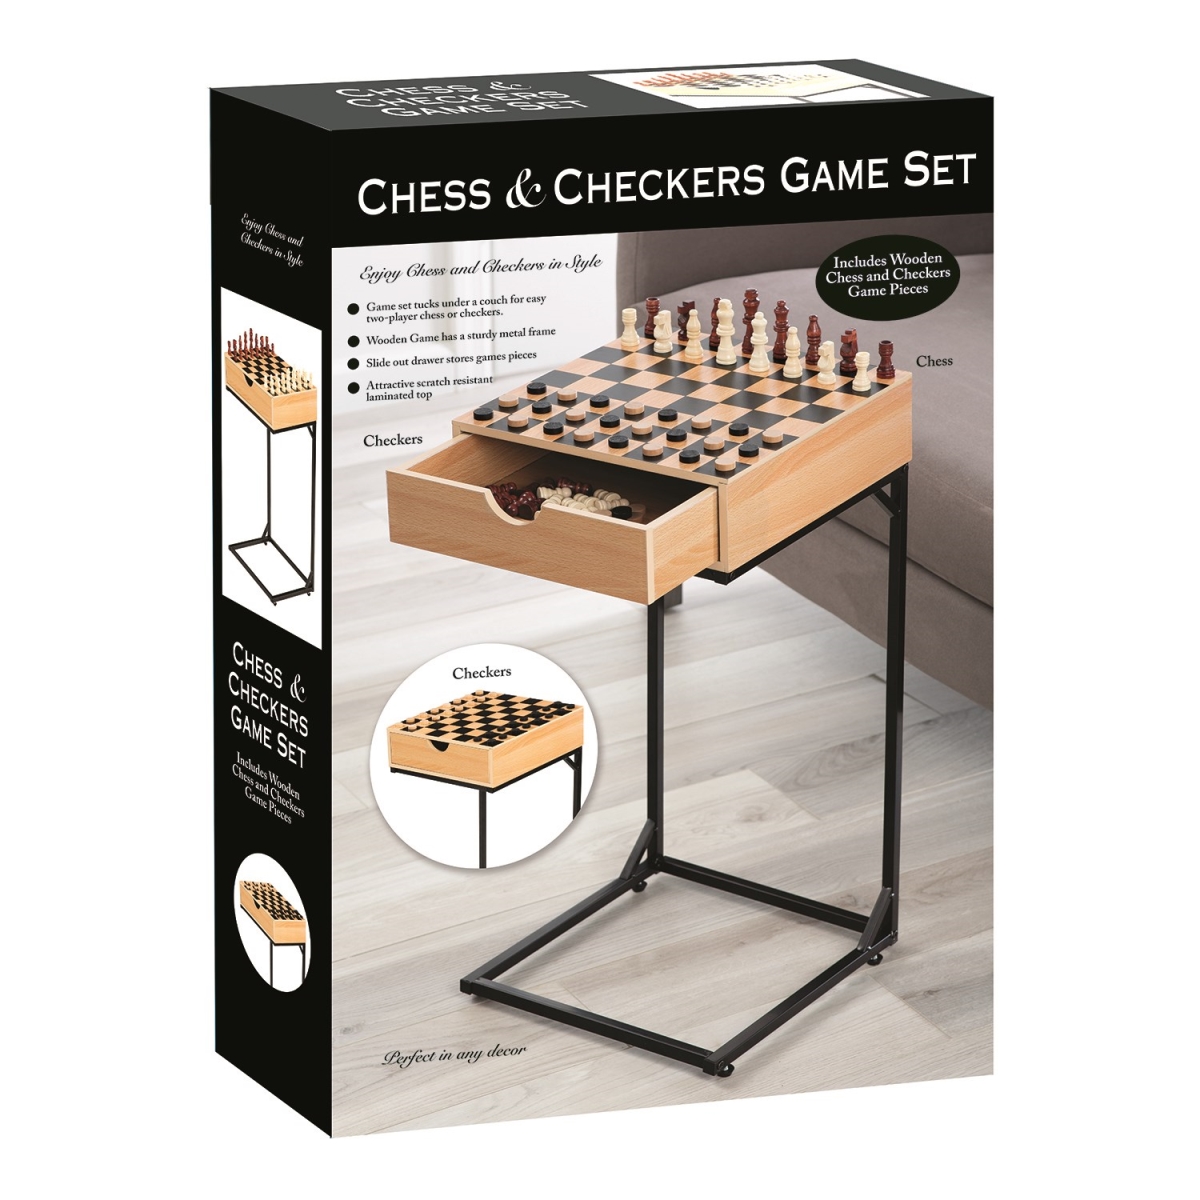 Picture of 212 Main 5281 Wooden Chess & Checkers Game Set with Metal Stand